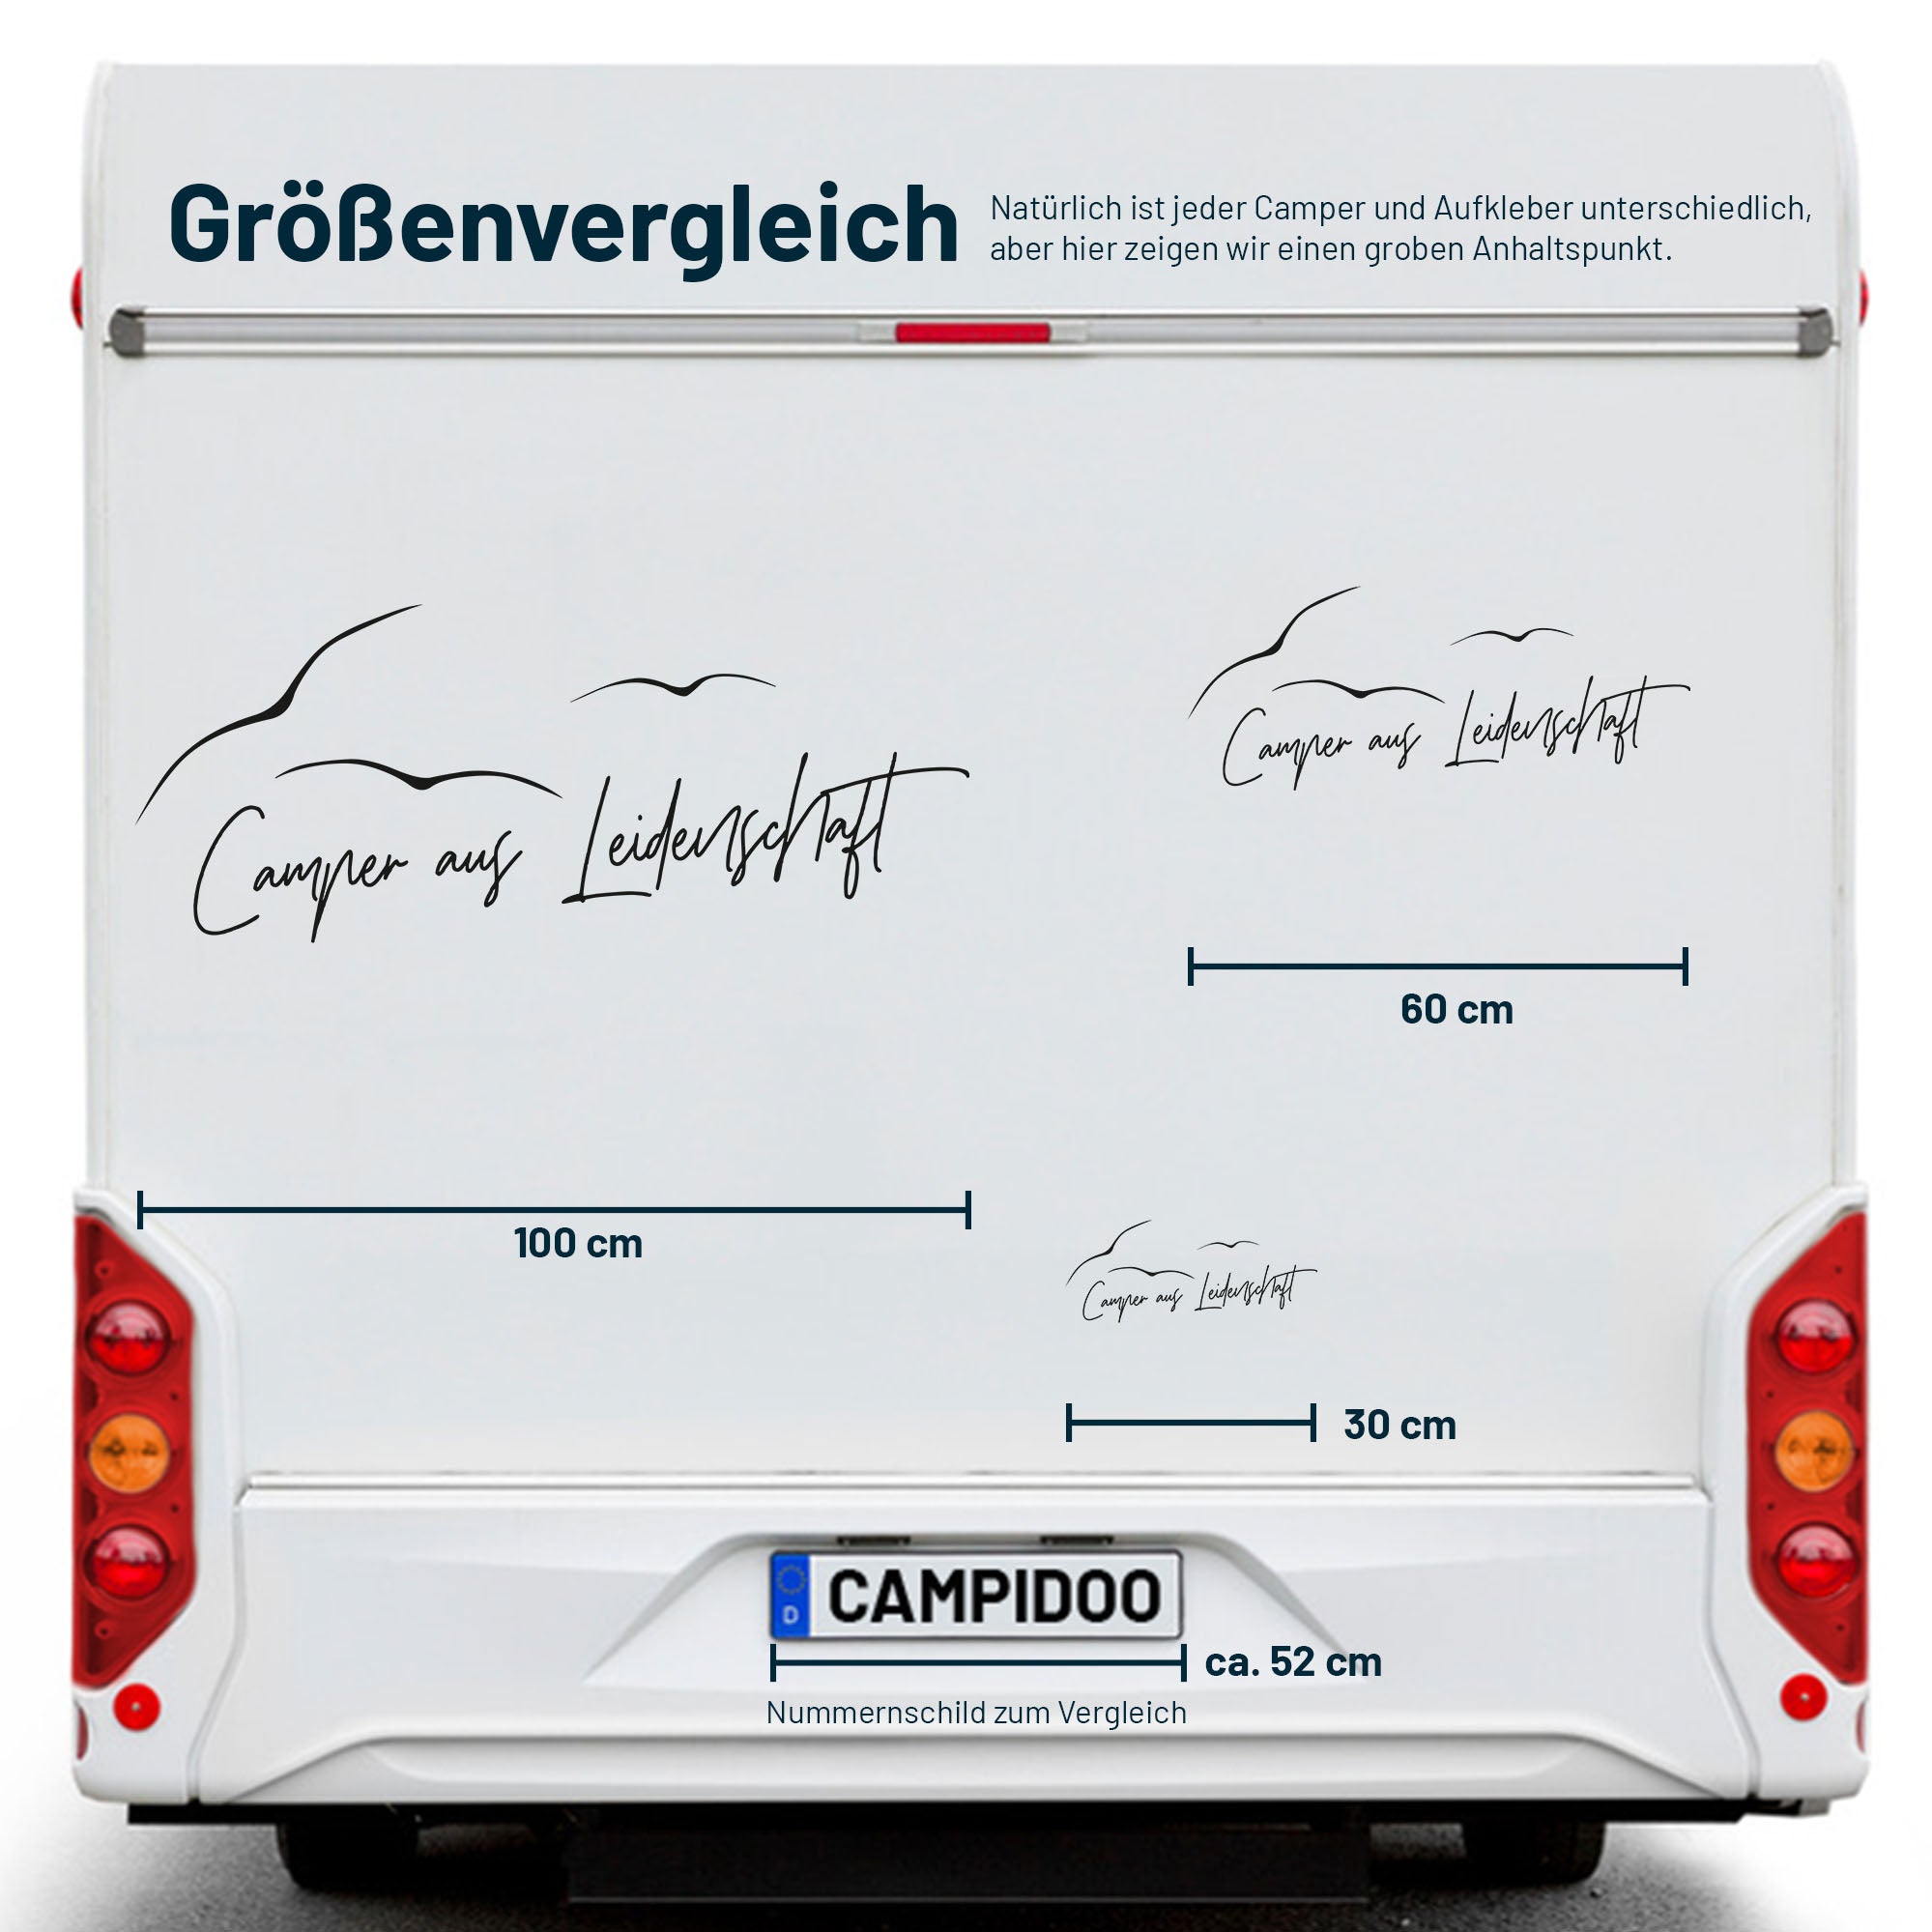 Camping sticker "Camper with passion"